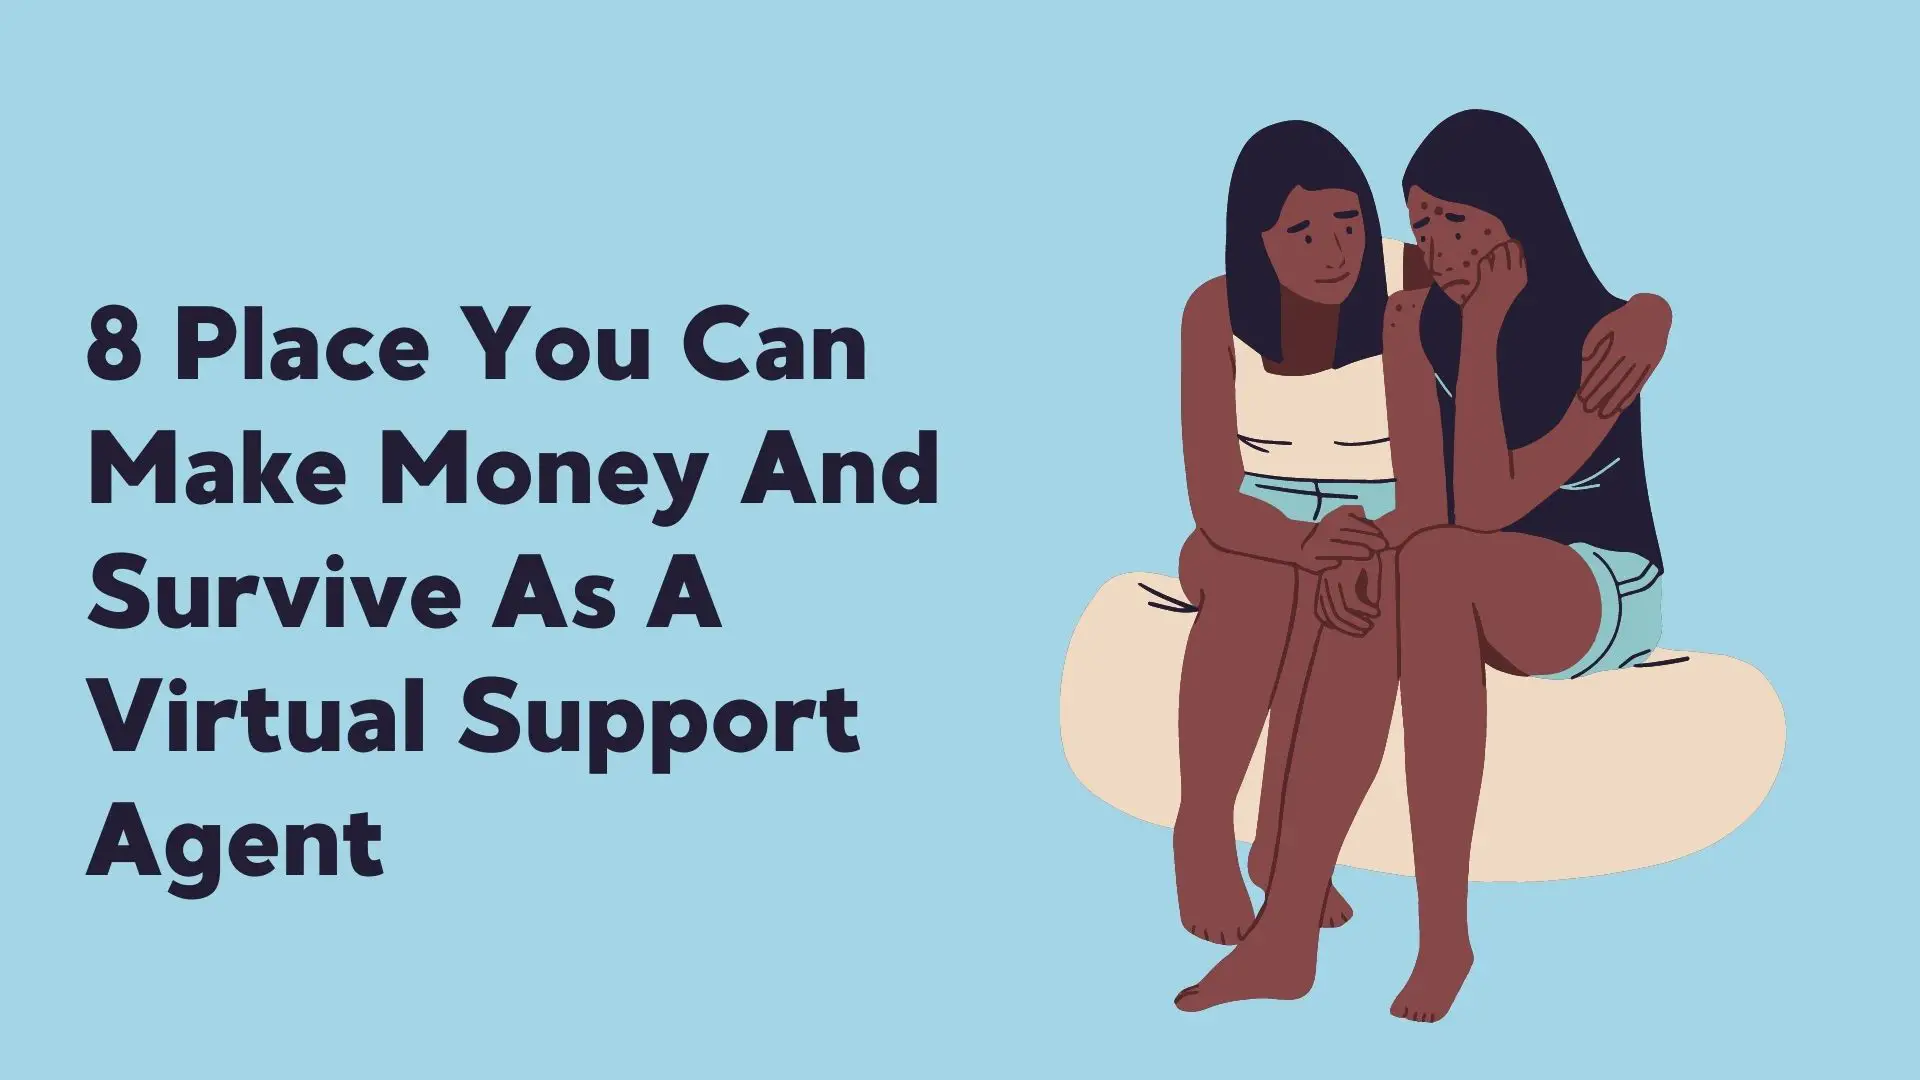 8 Place You Can Make Money And Survive As A Virtual Support Agent